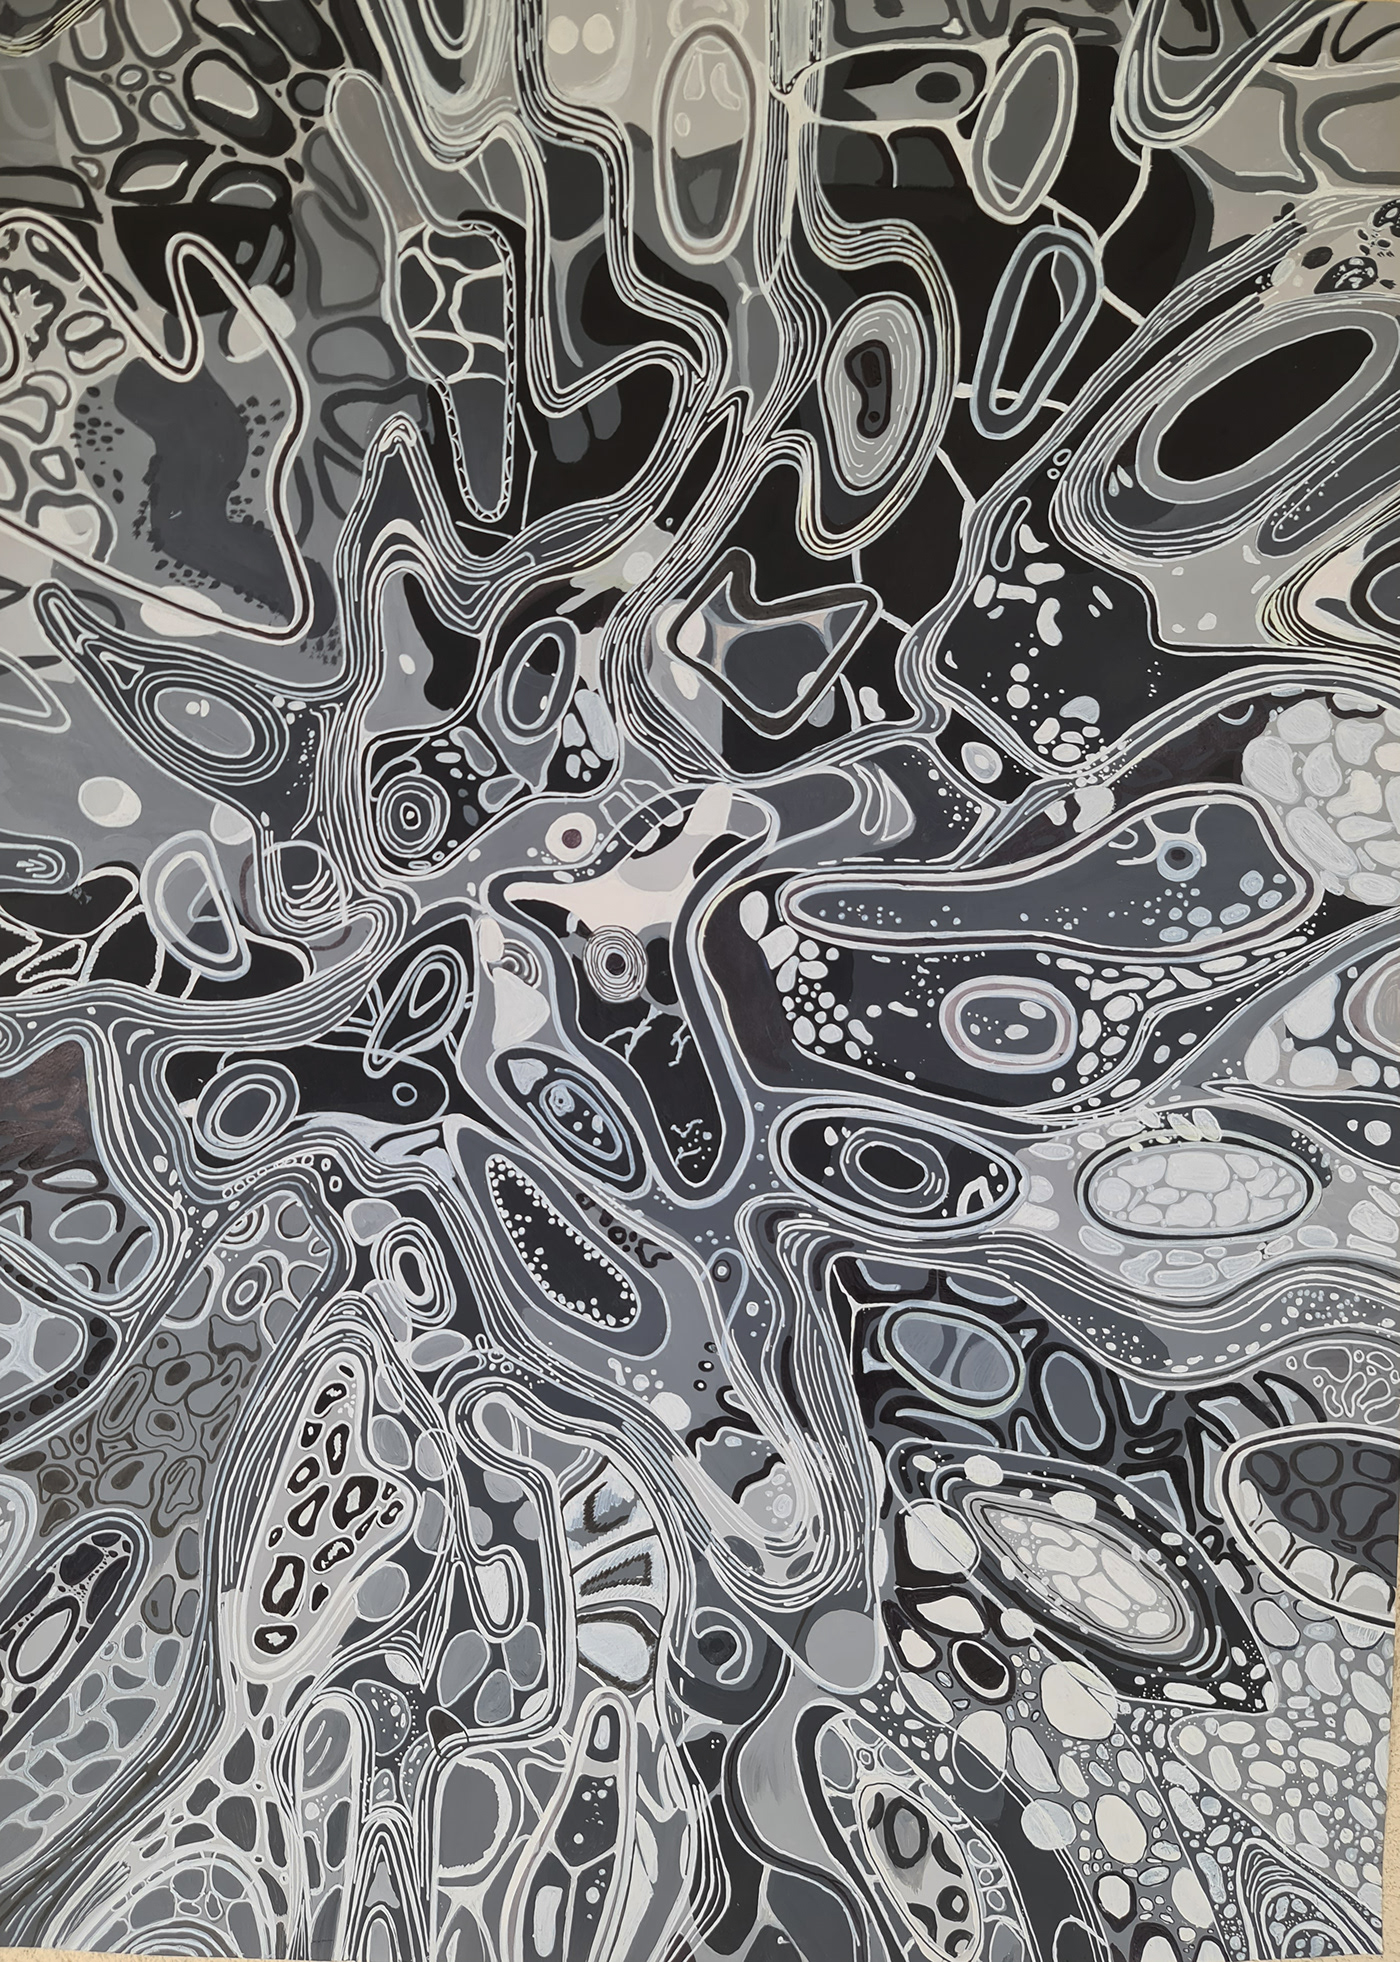 acrylic painting 50/70 black and white